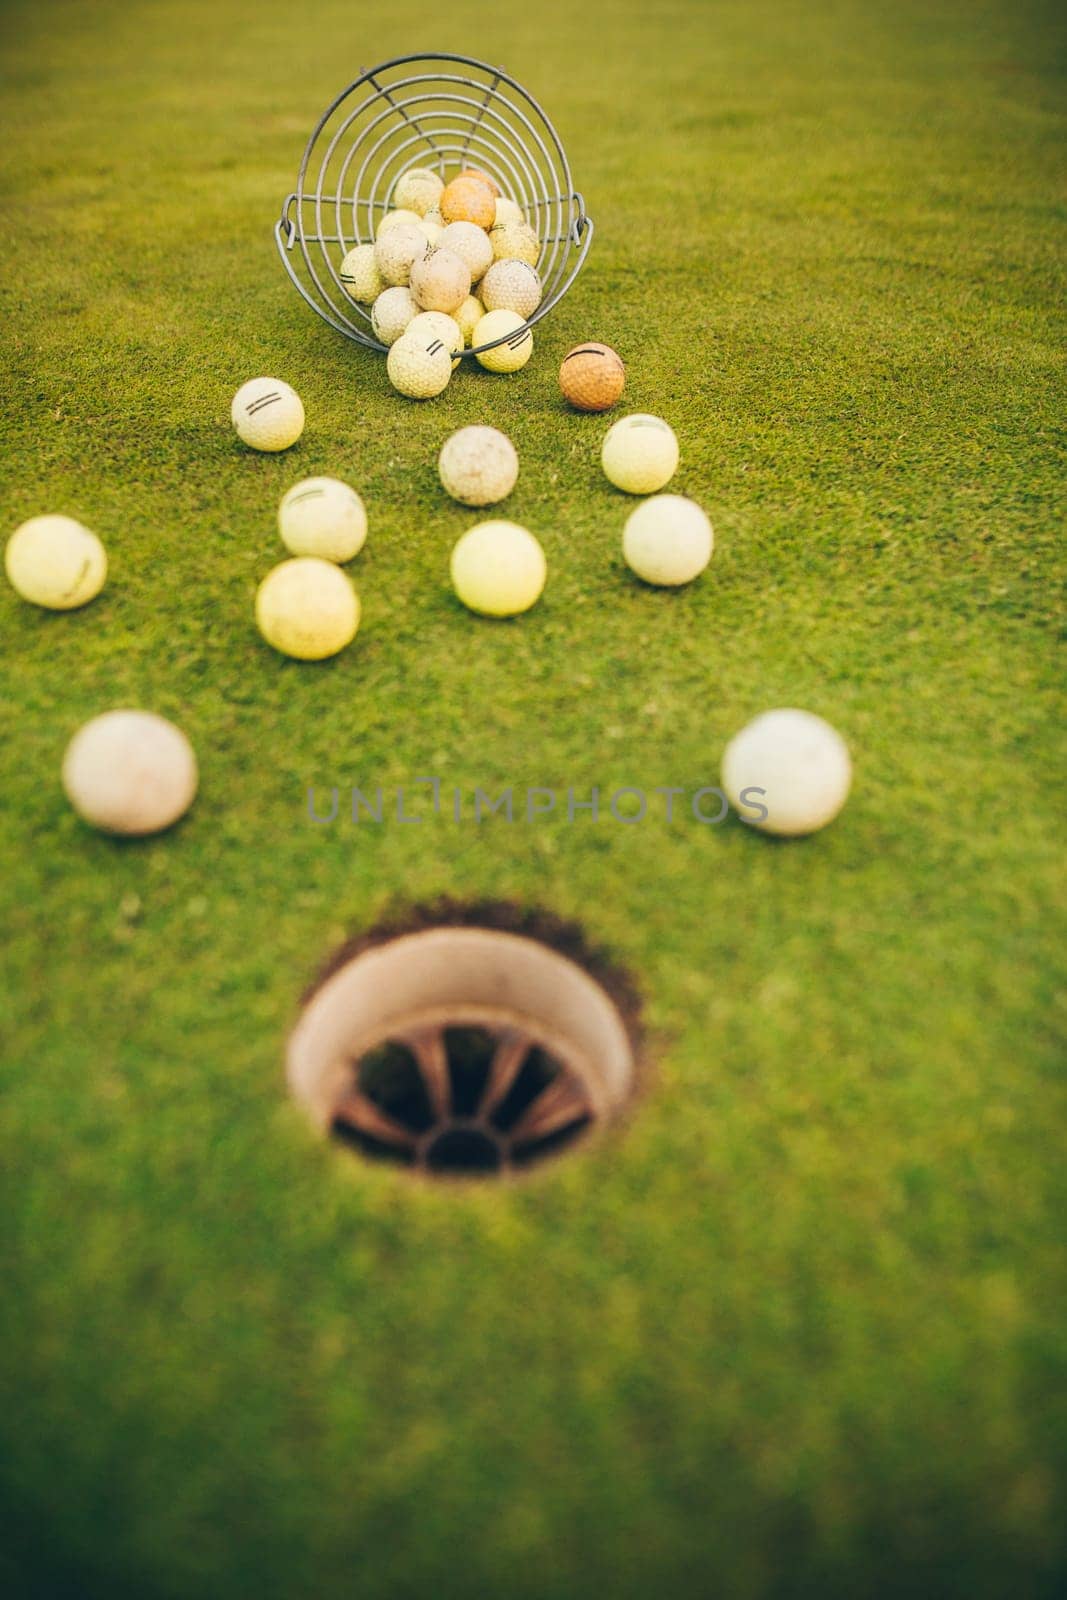 Close up of golf club and balls by the hole on the grass yard, sport concept by Kadula